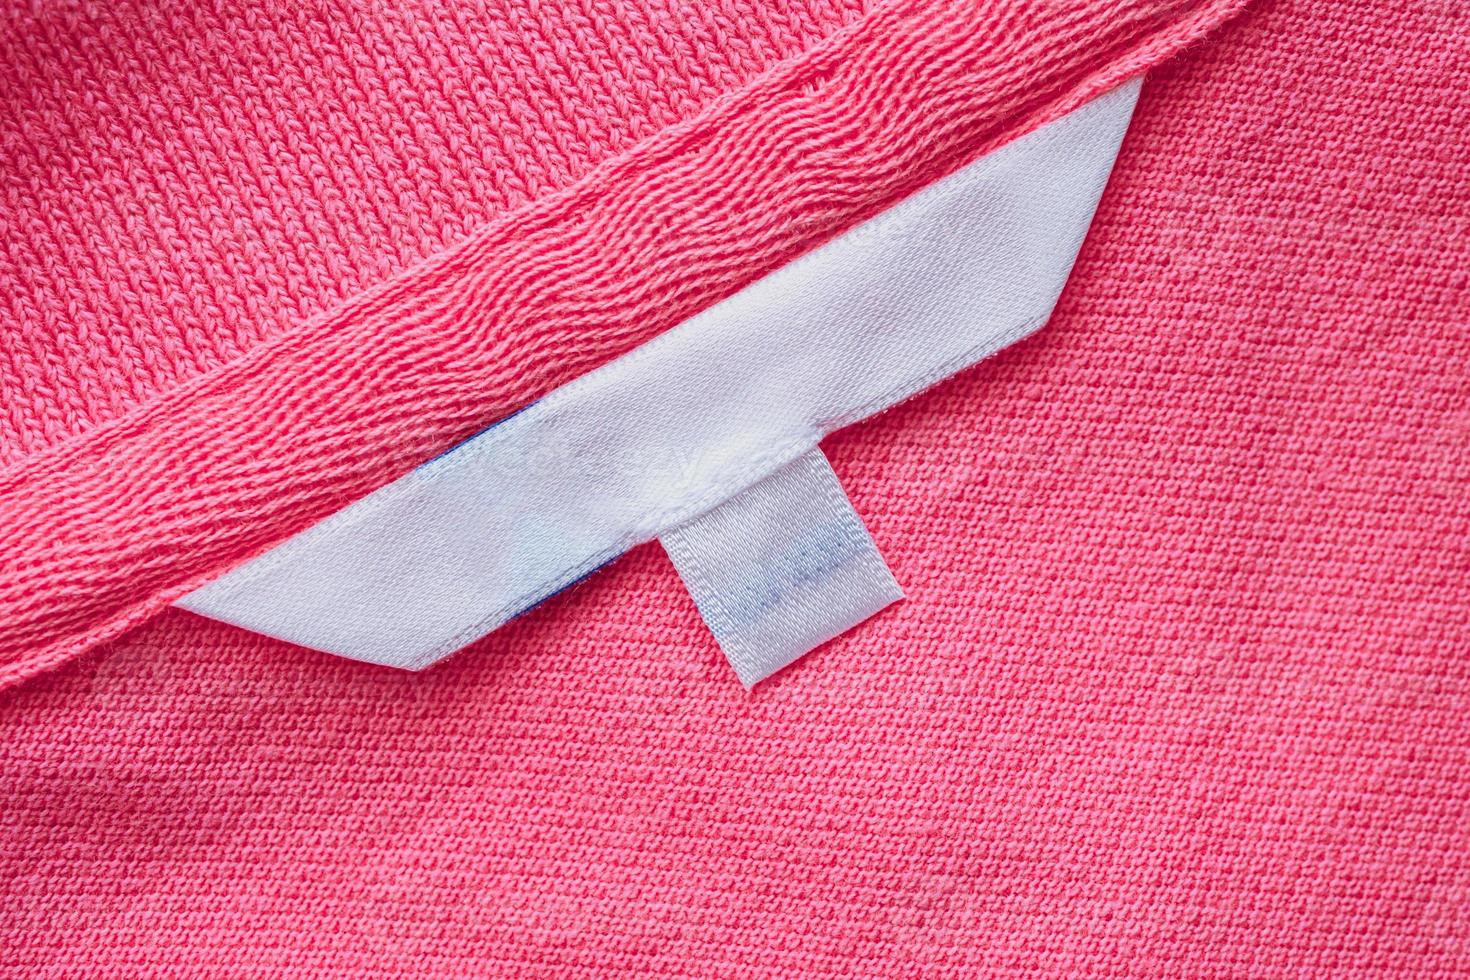 Blank white clothes label on new shirt photo